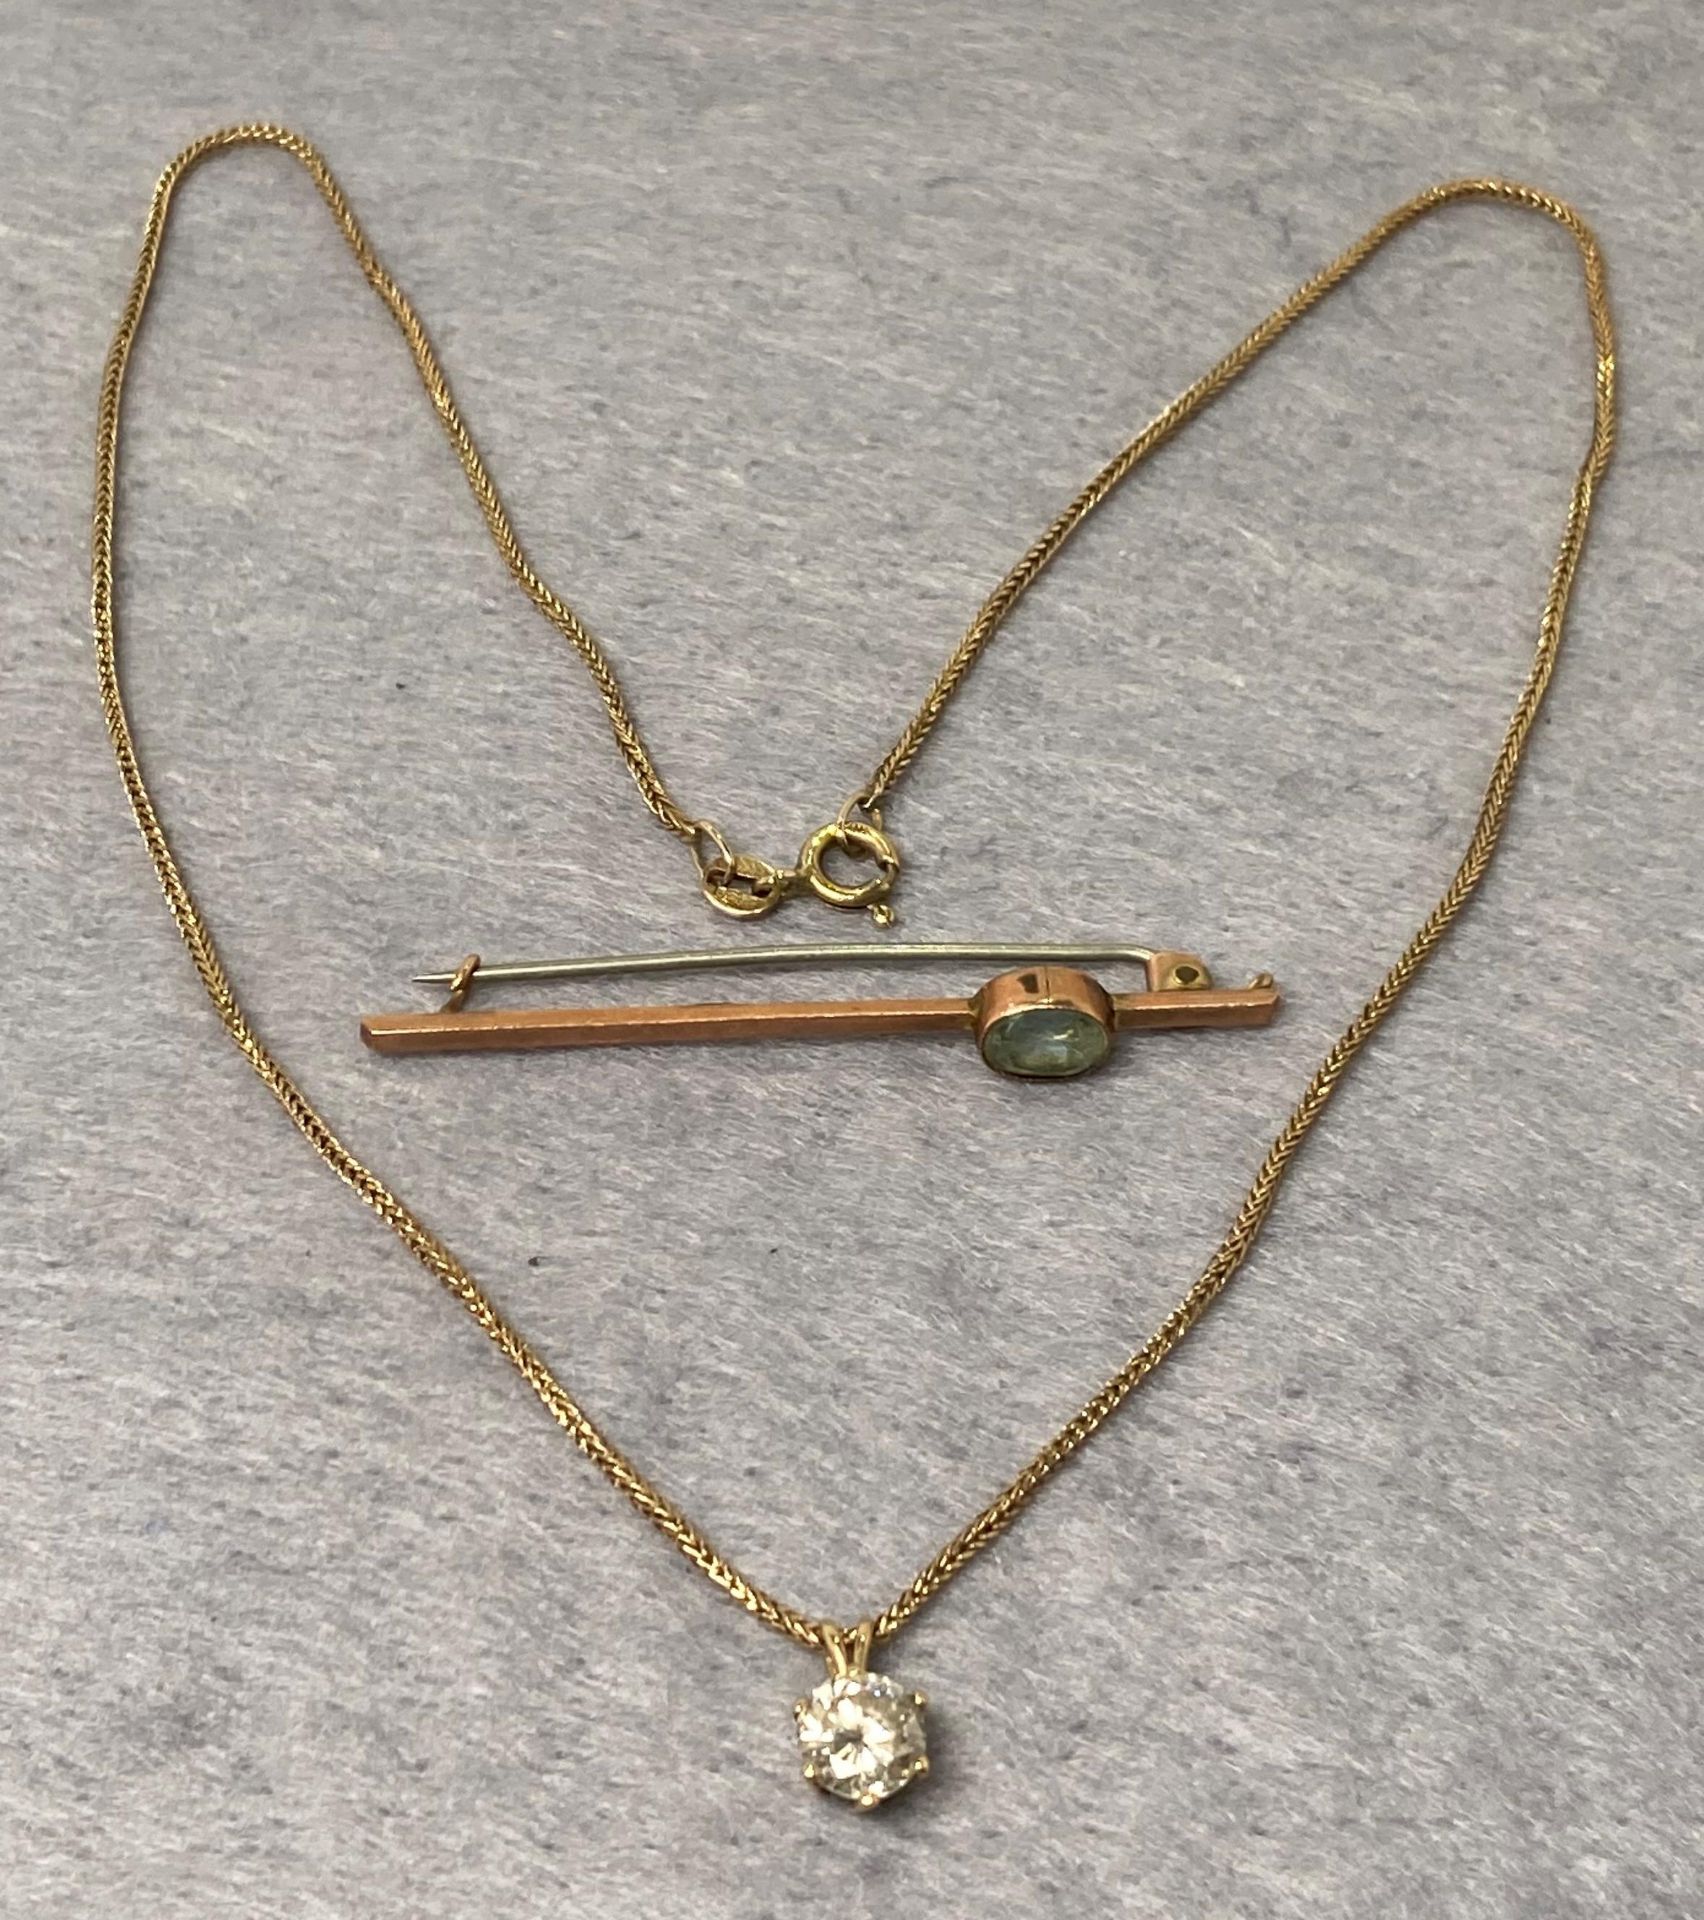 Two 9ct gold (375) items including a rope chain (16" long) with a 9ct gold single stone pendants